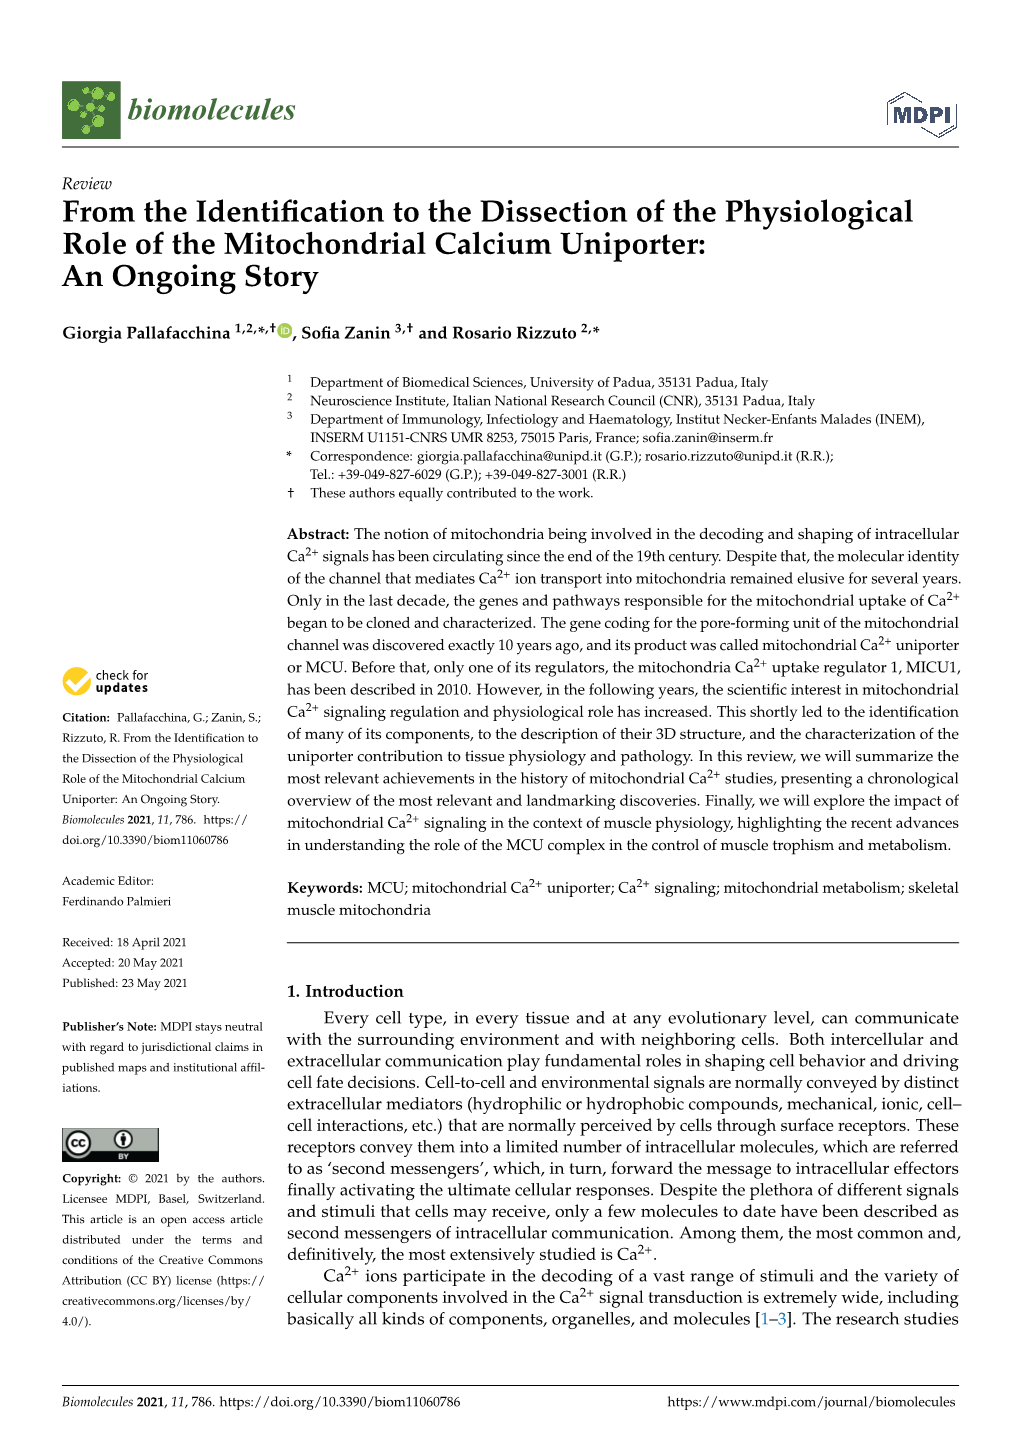 From the Identification to the Dissection of the Physiological Role of the Mitochondrial Calcium Uniporter: an Ongoing Story